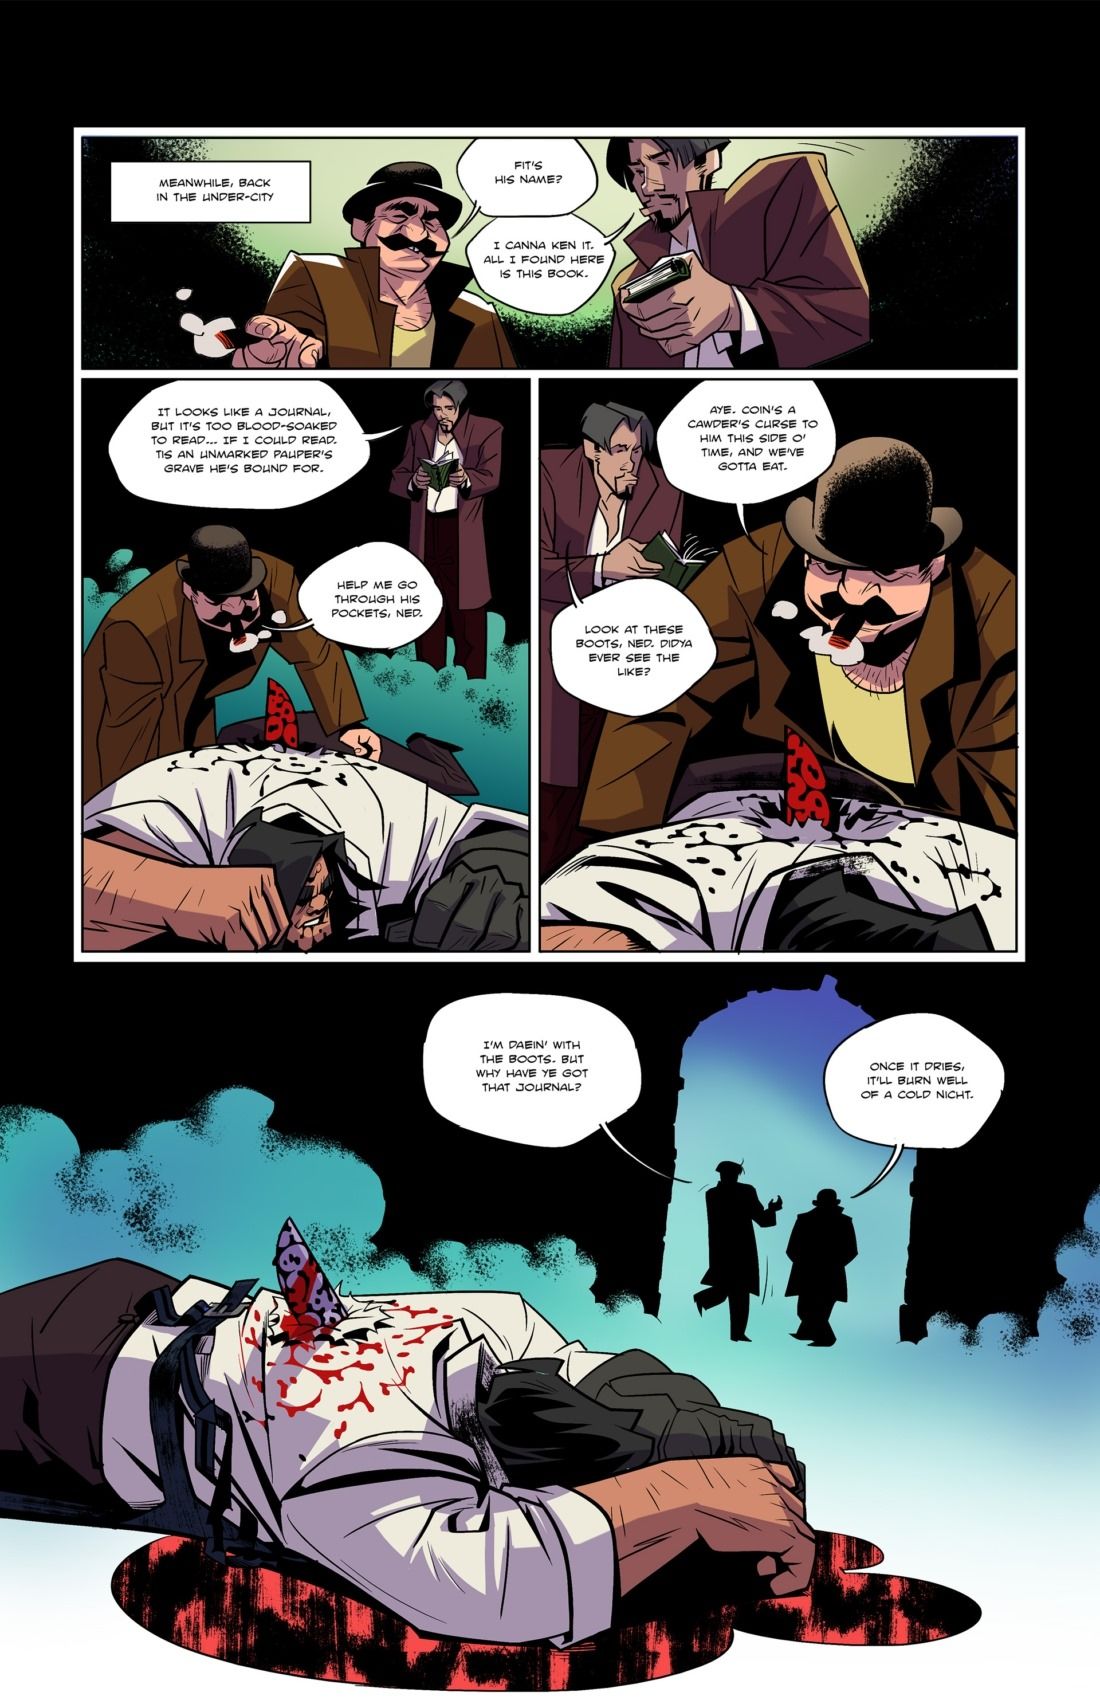 Steampumped Issue 2 by Amblagar (MuscleFan) page 15